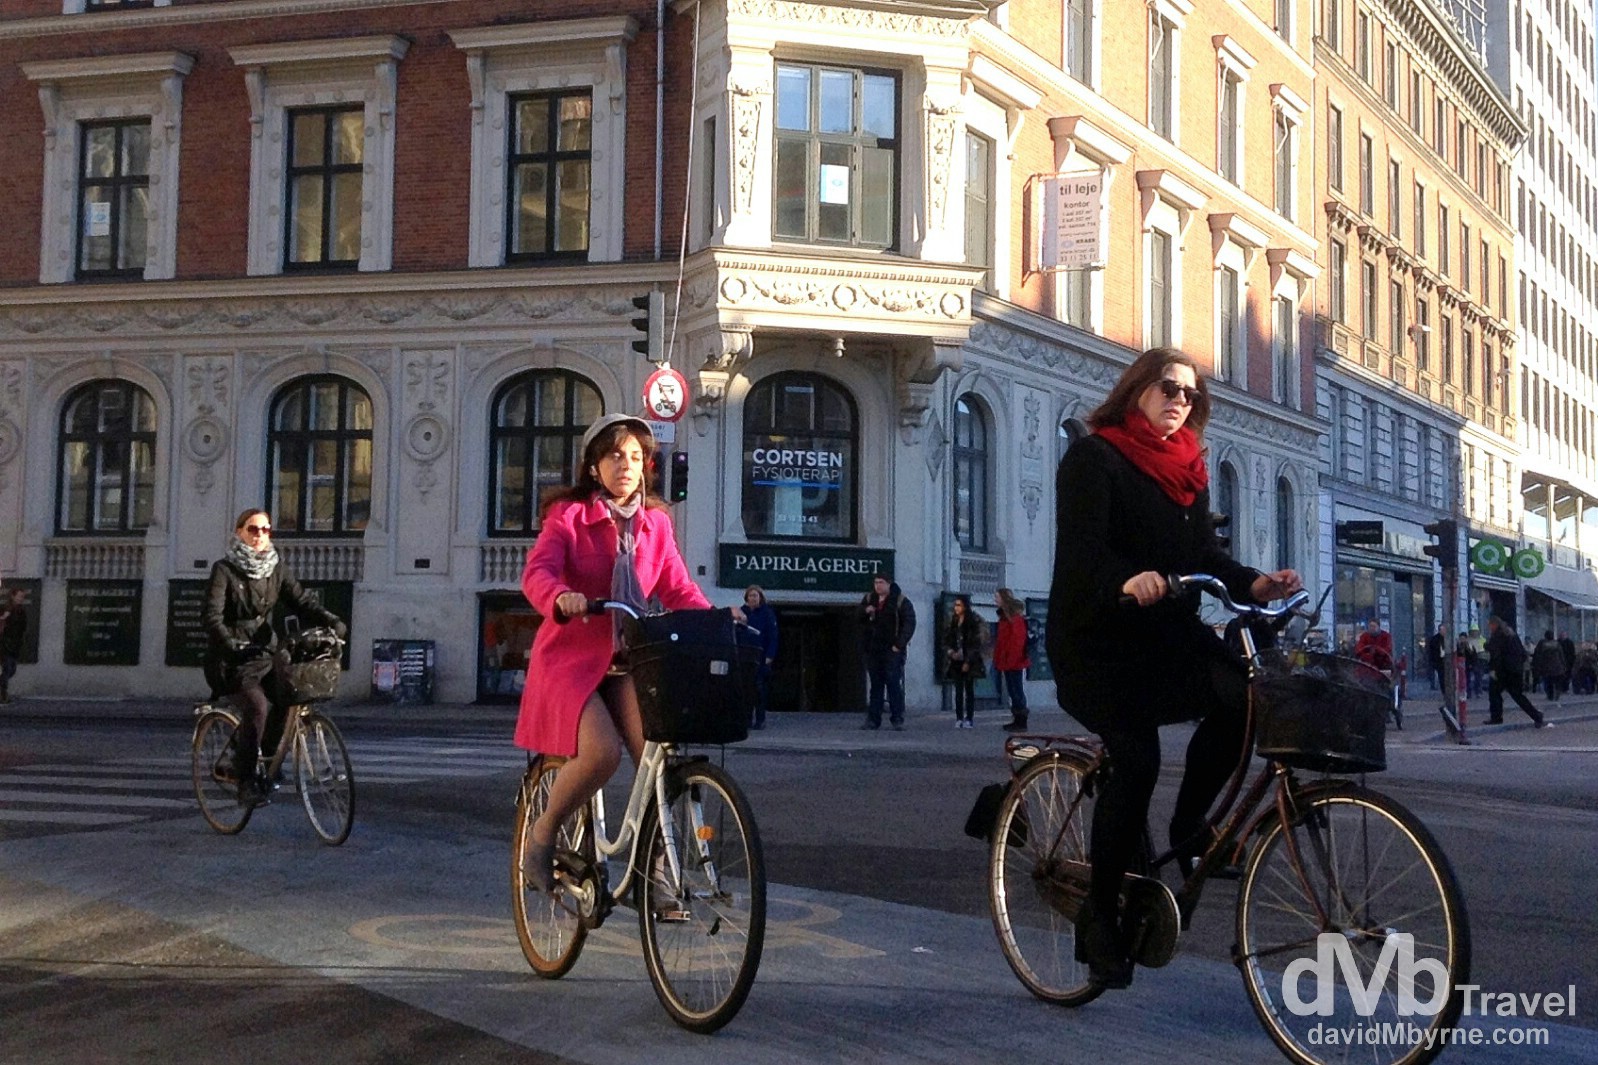 Cycling on the streets of Copenhagen, Denmark. March 13th, 2014 (iPod Touch v5)